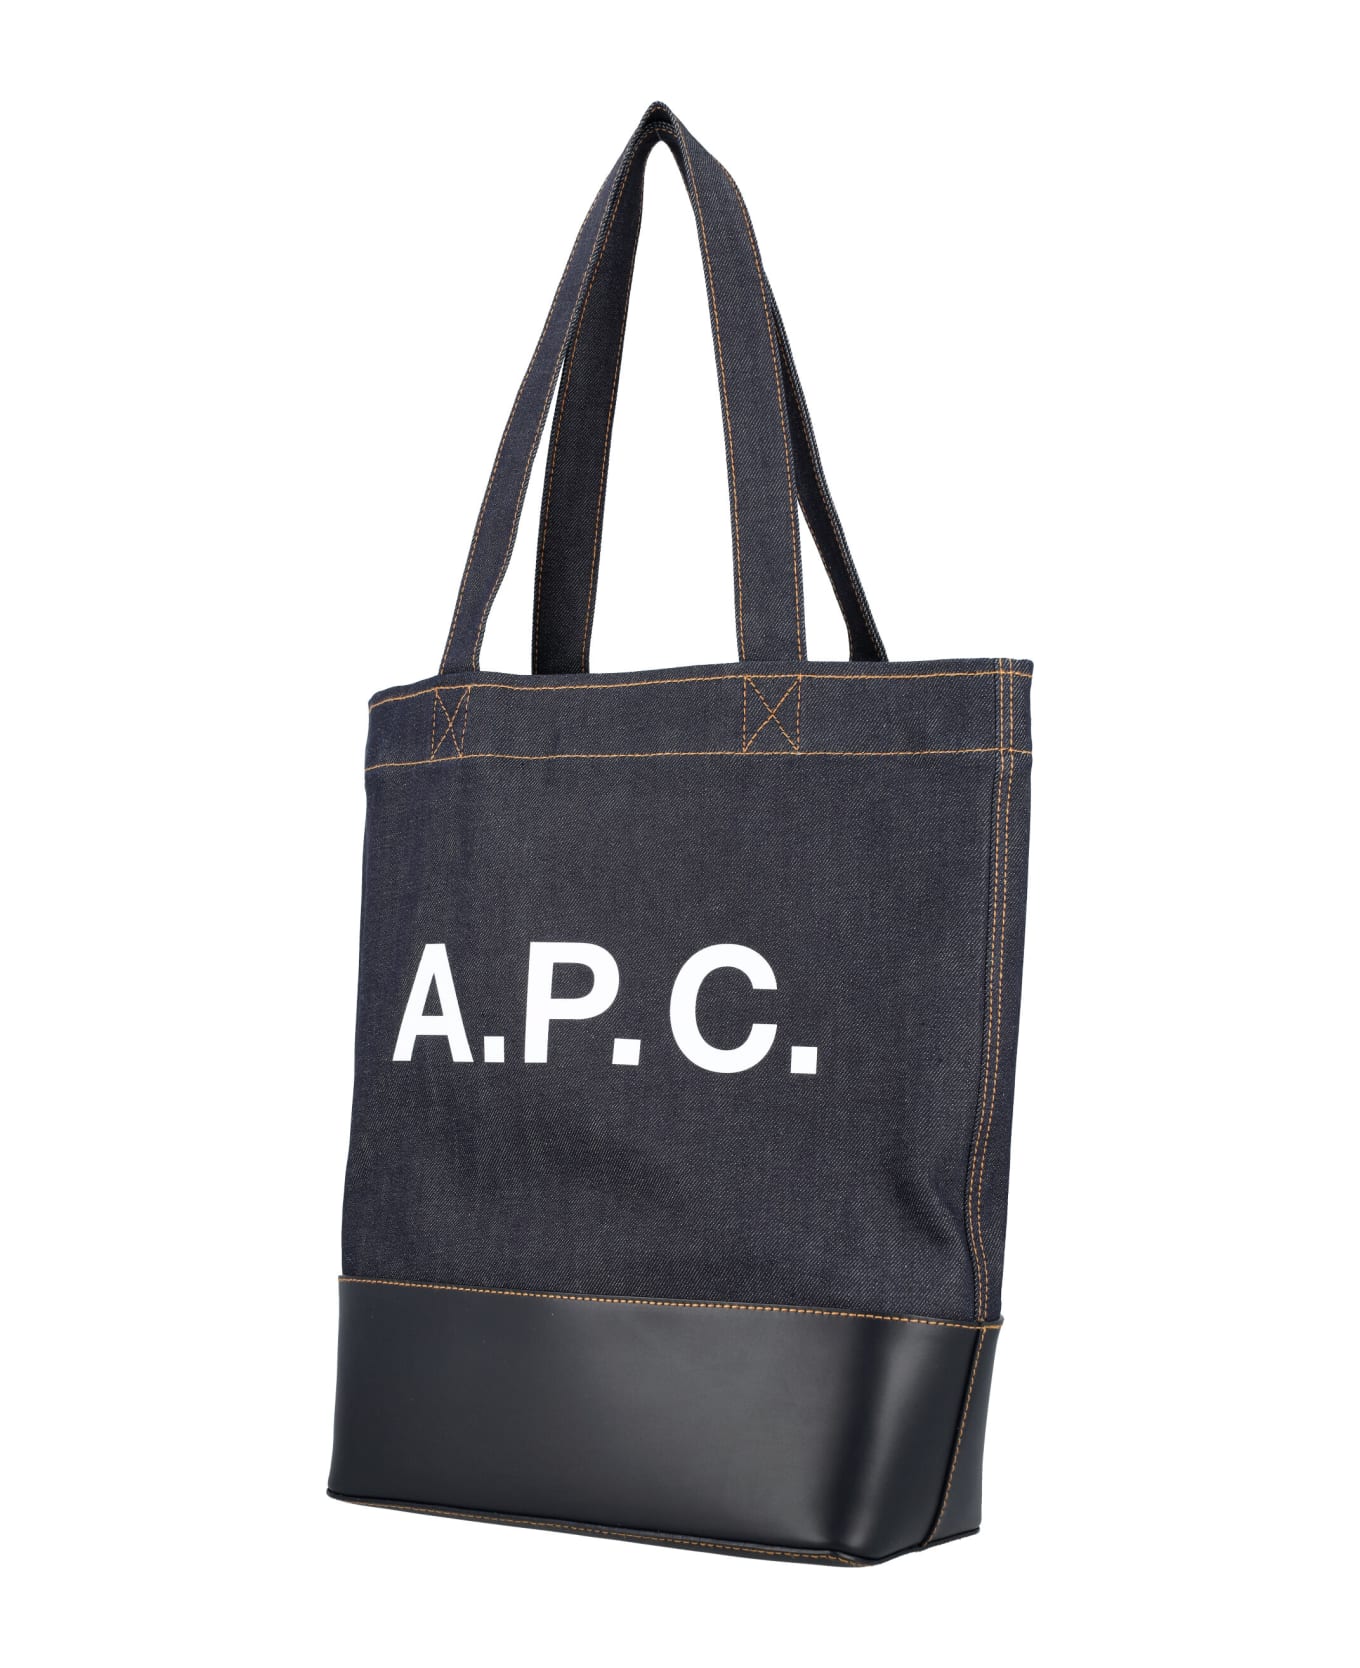 A.P.C. Axel Denim Tote - NAVY トートバッグ